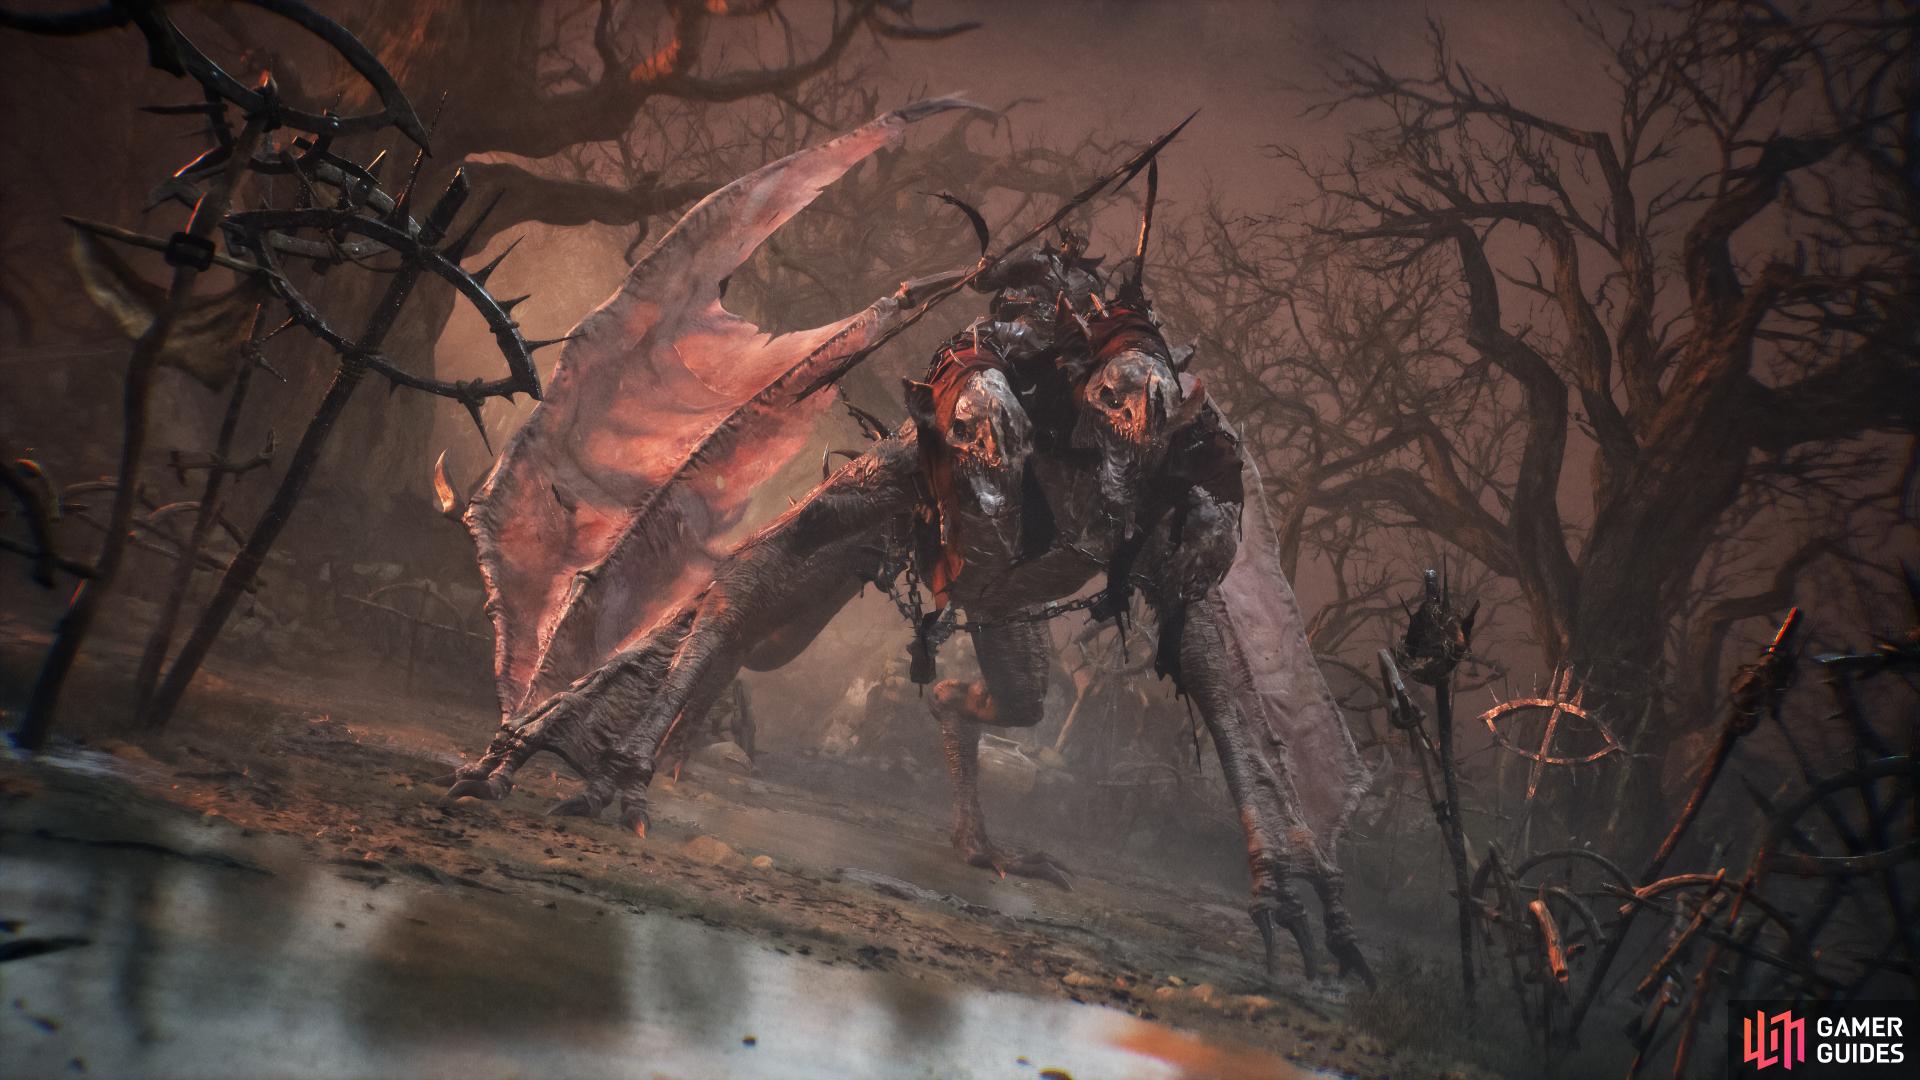 This guide will assist players with completing the Paladin Isaac questline in Lords of the Fallen. Image via Hexworks.